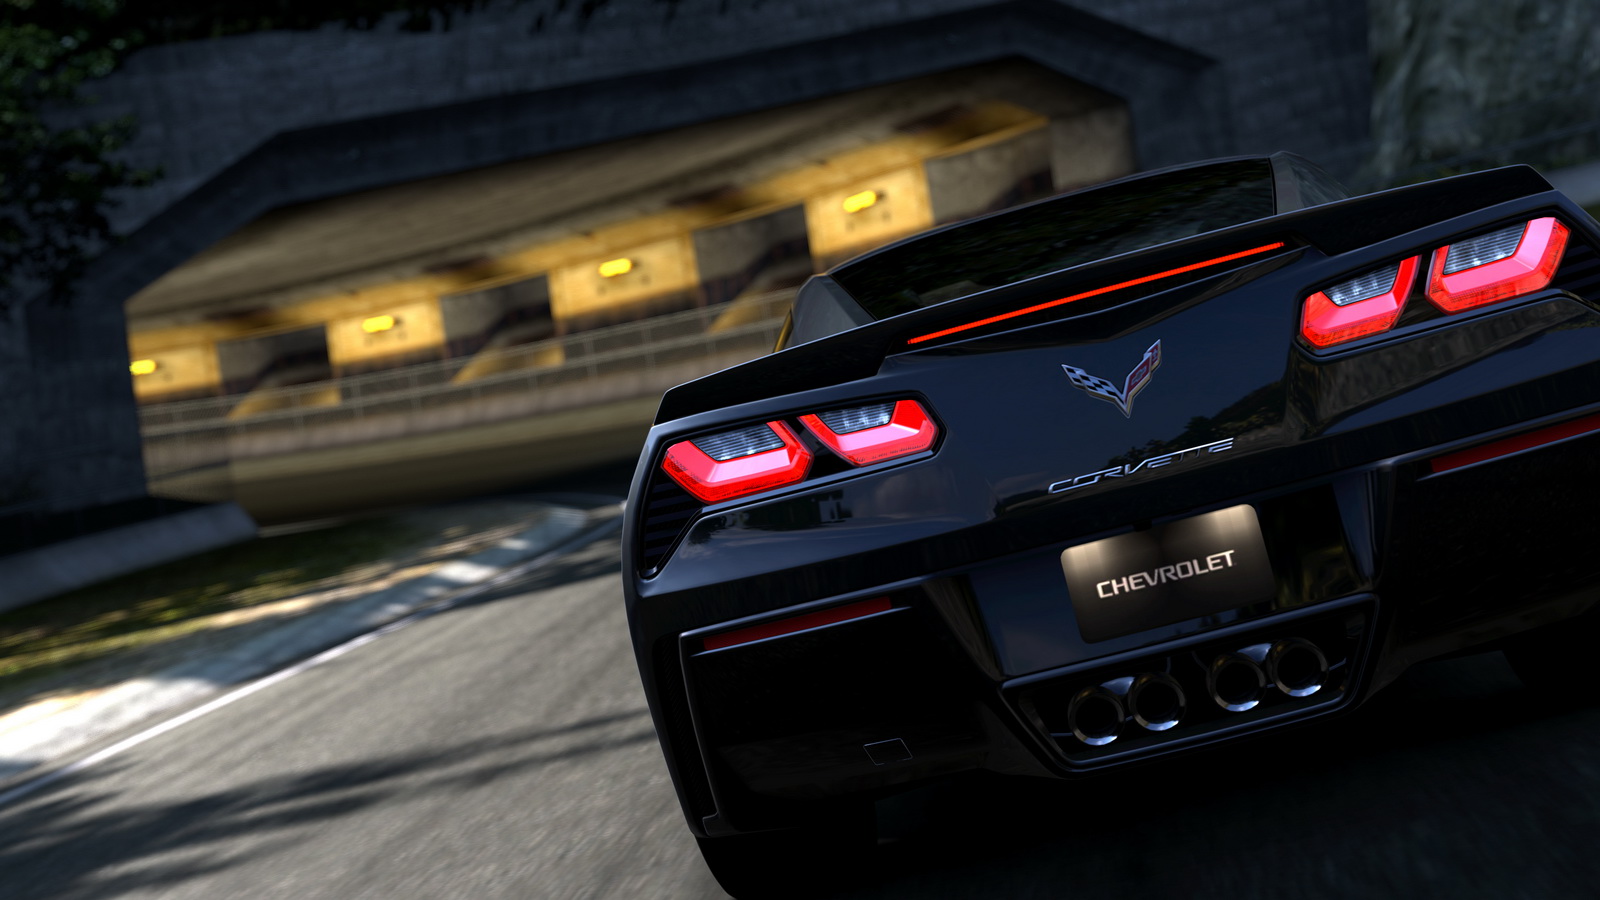 All Six Previous Generations Of The Corvette Have Been Available To